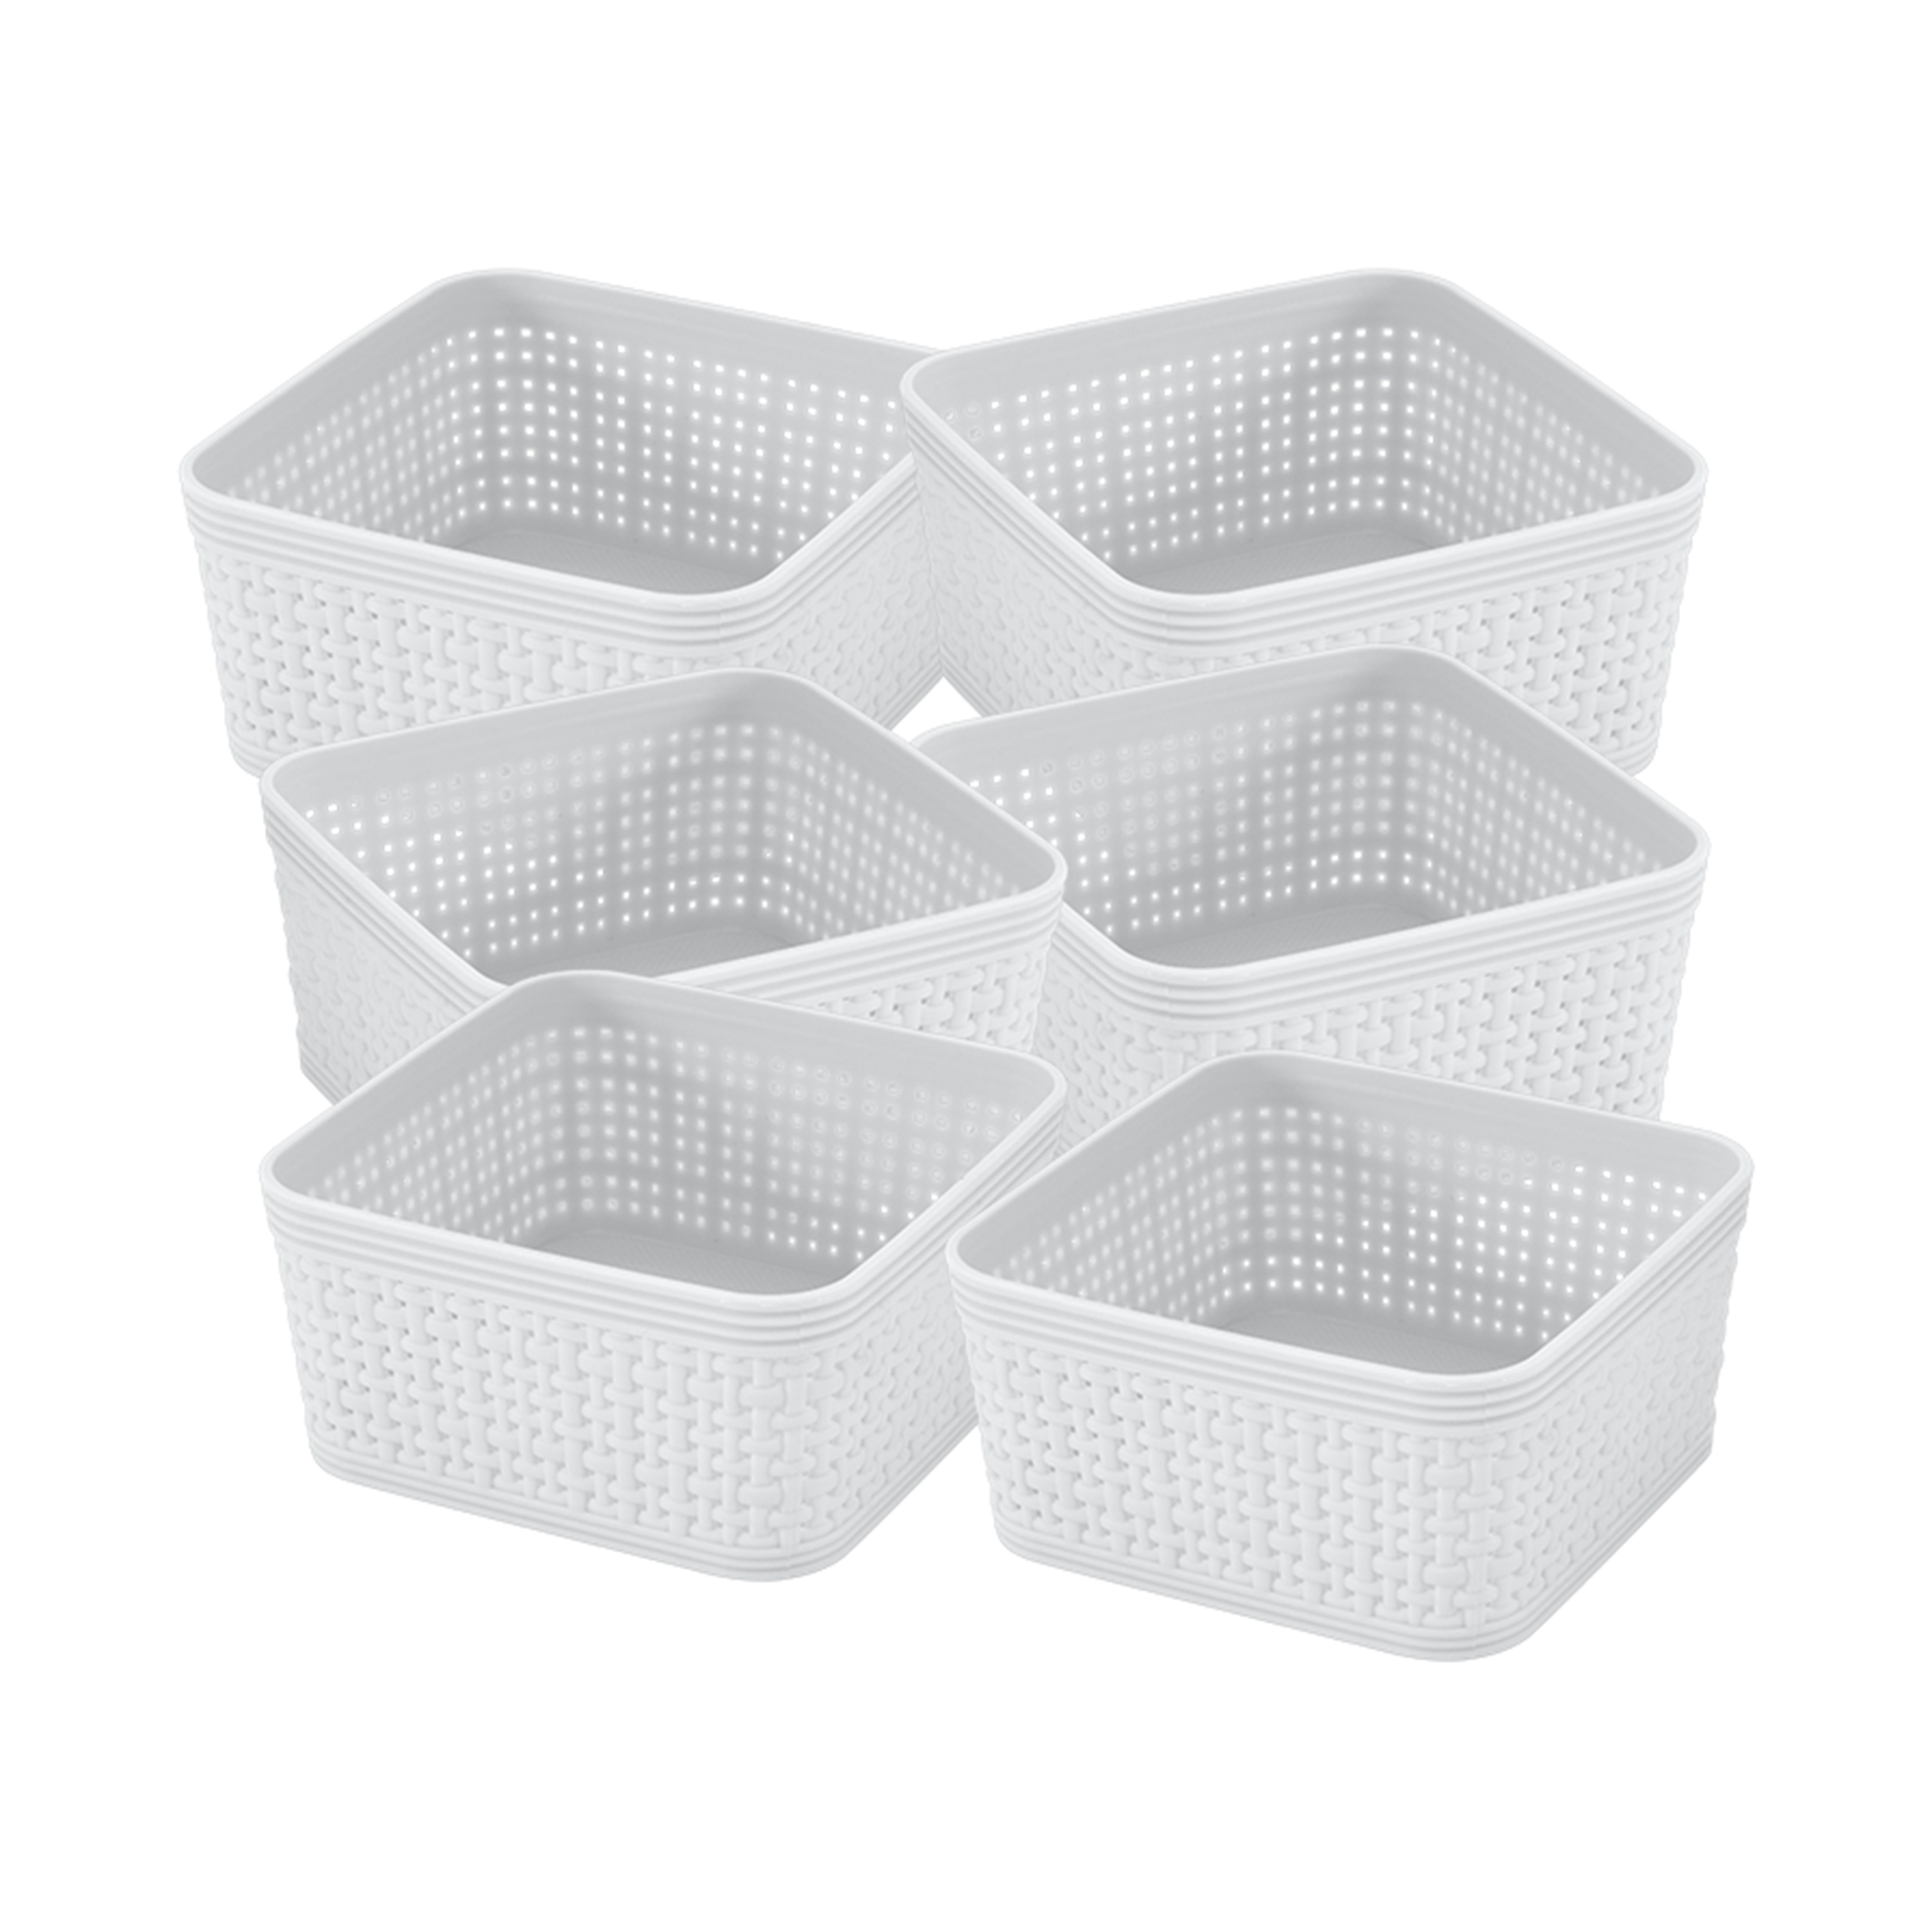 Simplify 4-Pack 12.76-in x 3.66-in Clear Plastic Drawer Organizer in the  Drawer Organizers department at